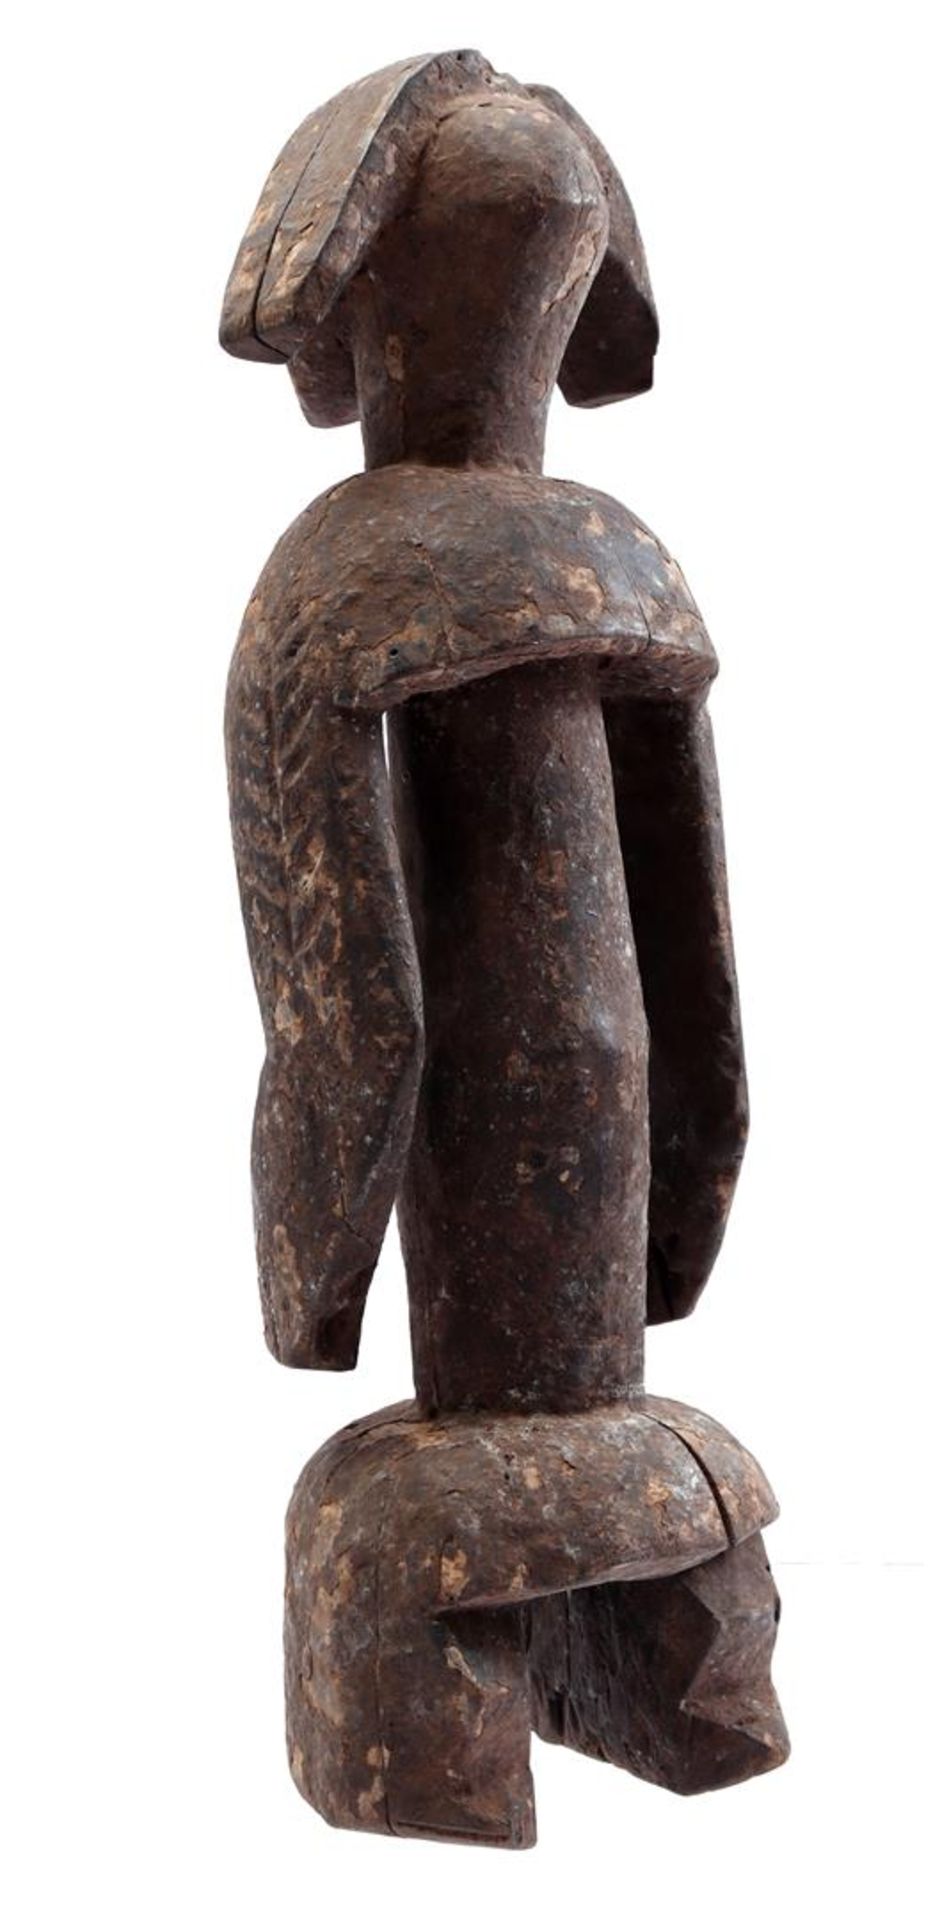 Wooden ceremonial statue of a woman, Mumuye - Image 3 of 4